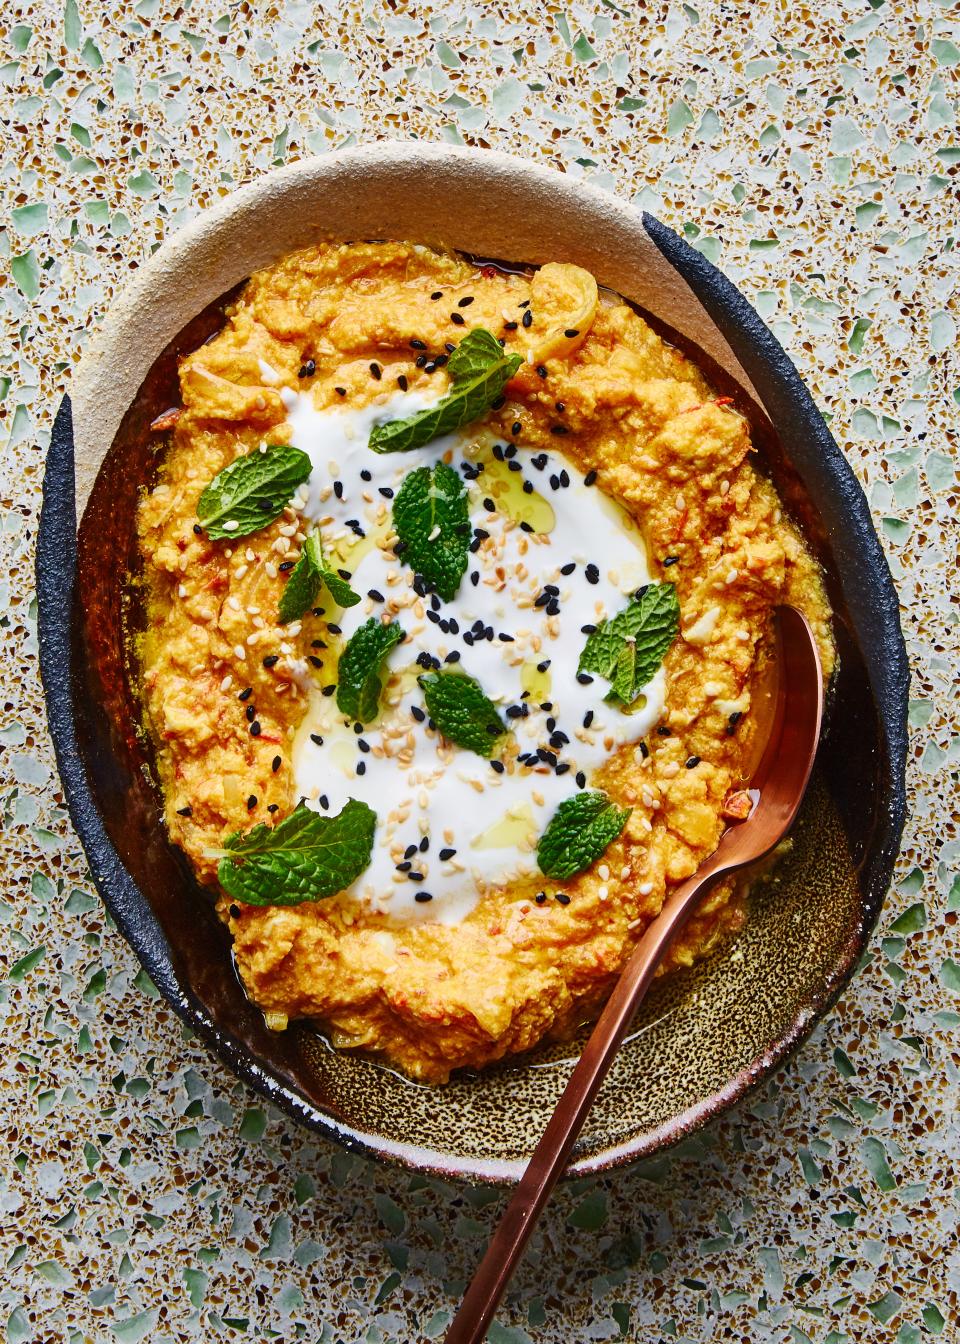 These Onion-y Turmeric Eggs Are the Perfect Breakfast Comfort Food